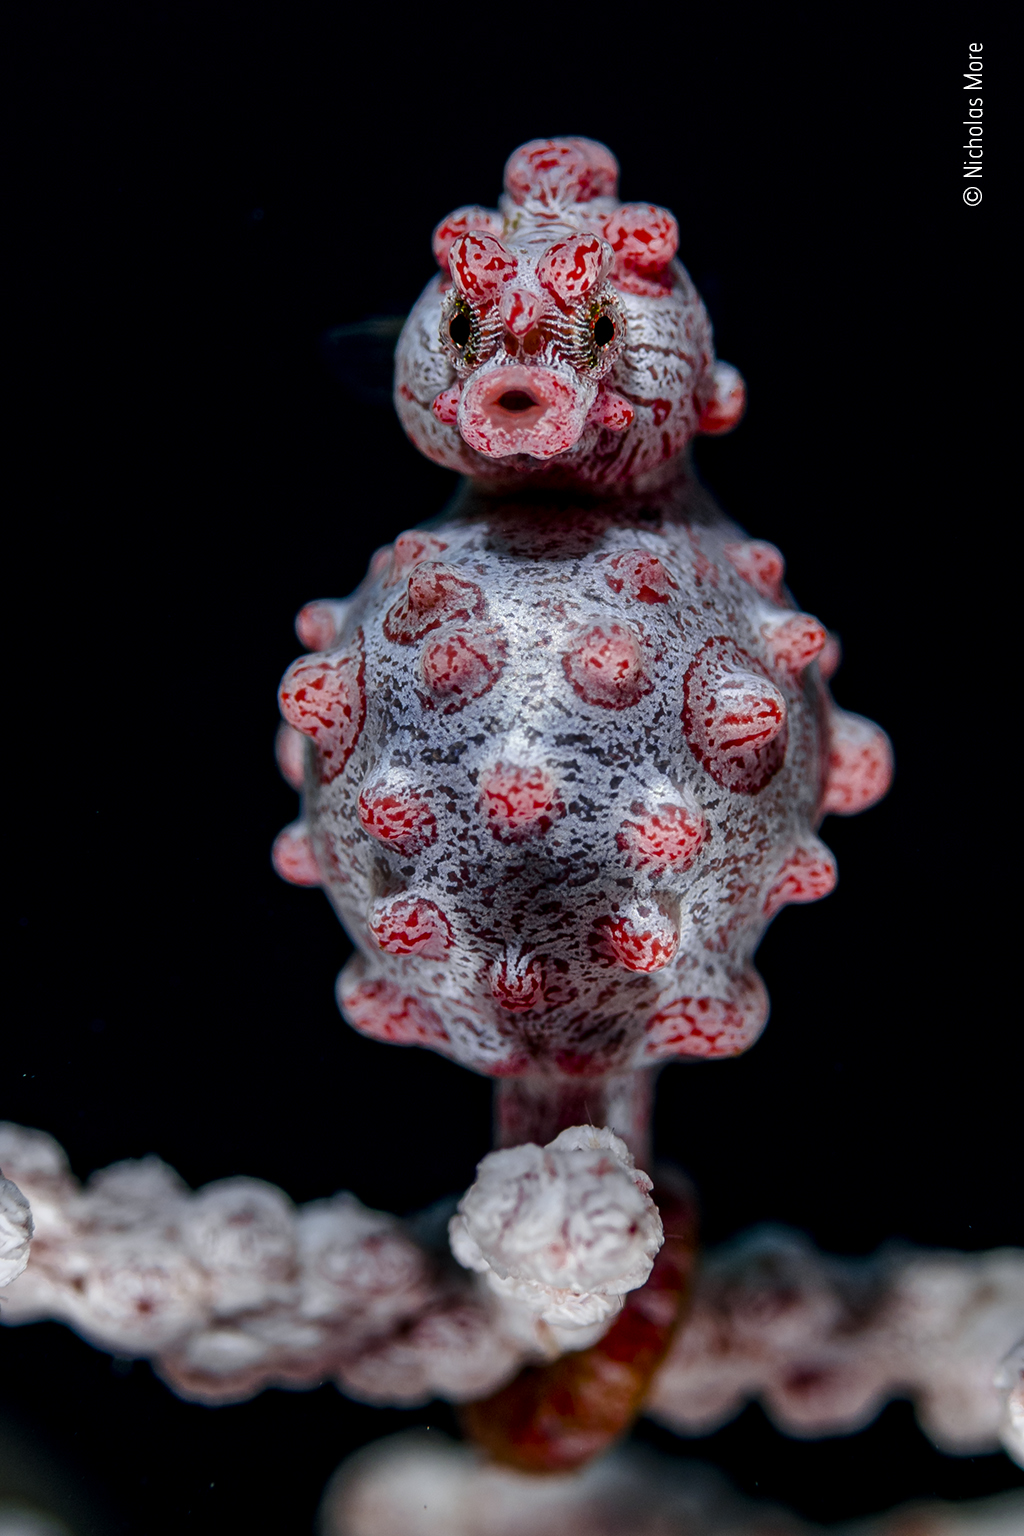 A pregnant male seahorse looks ready to pop.